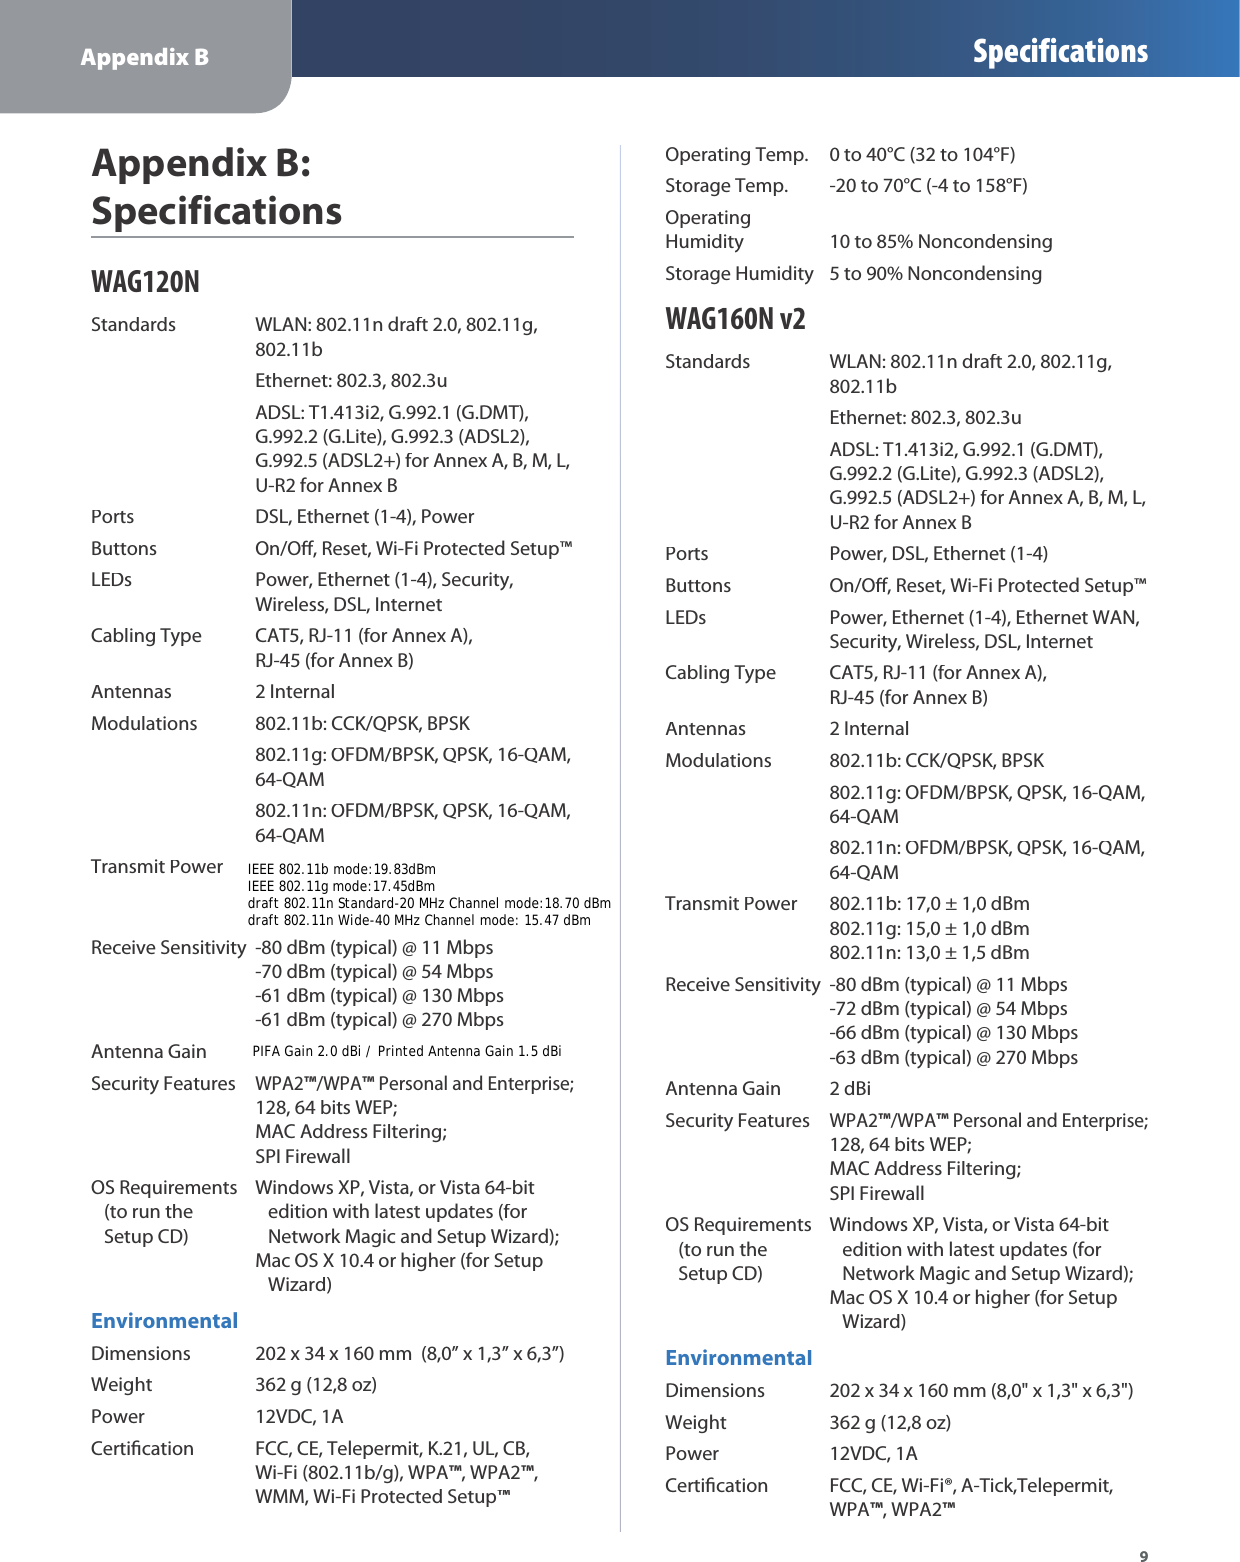 Appendix B Specifications9Appendix B: SpecificationsWAG120NStandardsWLAN: 802.11n draft 2.0, 802.11g,802.11bEthernet: 802.3, 802.3uADSL: T1.413i2, G.992.1 (G.DMT),G.992.2 (G.Lite), G.992.3 (ADSL2),G.992.5 (ADSL2+) for Annex A, B, M, L,U-R2 for Annex BPortsDSL, Ethernet (1-4), PowerButtonsOn/O, Reset, Wi-Fi Protected Setup™LEDsPower, Ethernet (1-4), Security,Wireless, DSL, InternetCabling TypeCAT5, RJ-11 (for Annex A),RJ-45 (for Annex B)Antennas2 InternalModulations802.11b: CCK/QPSK, BPSK802.11g: OFDM/BPSK, QPSK, 16-QAM,64-QAM802.11n: OFDM/BPSK, QPSK, 16-QAM,64-QAMTransmit PowerReceive Sensitivity-80 dBm (typical) @ 11 Mbps-70 dBm (typical) @ 54 Mbps-61 dBm (typical) @ 130 Mbps-61 dBm (typical) @ 270 MbpsAntenna GainSecurity FeaturesWPA2™/WPA™ Personal and Enterprise;128, 64 bits WEP;MAC Address Filtering;SPI FirewallOS RequirementsWindows XP, Vista, or Vista 64-bit   (to run the   edition with latest updates (for   Setup CD)   Network Magic and Setup Wizard);Mac OS X 10.4 or higher (for Setup   Wizard)EnvironmentalDimensions202 x 34 x 160 mm  (8,0” x 1,3” x 6,3”)Weight362 g (12,8 oz)Power12VDC, 1ACerticationFCC, CE, Telepermit, K.21, UL, CB,Wi-Fi (802.11b/g), WPA™, WPA2™,WMM, Wi-Fi Protected Setup™Operating Temp.0 to 40°C (32 to 104°F)Storage Temp.-20 to 70°C (-4 to 158°F)OperatingHumidity10 to 85% NoncondensingStorage Humidity5 to 90% NoncondensingWAG160N v2StandardsWLAN: 802.11n draft 2.0, 802.11g,802.11bEthernet: 802.3, 802.3uADSL: T1.413i2, G.992.1 (G.DMT),G.992.2 (G.Lite), G.992.3 (ADSL2),G.992.5 (ADSL2+) for Annex A, B, M, L,U-R2 for Annex BPortsPower, DSL, Ethernet (1-4)ButtonsOn/O, Reset, Wi-Fi Protected Setup™LEDsPower, Ethernet (1-4), Ethernet WAN,Security, Wireless, DSL, InternetCabling TypeCAT5, RJ-11 (for Annex A),RJ-45 (for Annex B)Antennas2 InternalModulations802.11b: CCK/QPSK, BPSK802.11g: OFDM/BPSK, QPSK, 16-QAM,64-QAM802.11n: OFDM/BPSK, QPSK, 16-QAM,64-QAMTransmit Power802.11b: 17,0 ± 1,0 dBm802.11g: 15,0 ± 1,0 dBm802.11n: 13,0 ± 1,5 dBmReceive Sensitivity-80 dBm (typical) @ 11 Mbps-72 dBm (typical) @ 54 Mbps-66 dBm (typical) @ 130 Mbps-63 dBm (typical) @ 270 MbpsAntenna Gain2 dBiSecurity FeaturesWPA2™/WPA™ Personal and Enterprise;128, 64 bits WEP;MAC Address Filtering;SPI FirewallOS RequirementsWindows XP, Vista, or Vista 64-bit   (to run the   edition with latest updates (for   Setup CD)   Network Magic and Setup Wizard);Mac OS X 10.4 or higher (for Setup   Wizard)EnvironmentalDimensions202 x 34 x 160 mm (8,0&quot; x 1,3&quot; x 6,3&quot;)Weight362 g (12,8 oz)Power12VDC, 1ACerticationFCC, CE, Wi-Fi®, A-Tick,Telepermit,WPA™, WPA2™IEEE 802.11b mode:19.83dBmIEEE 802.11g mode:17.45dBmdraft 802.11n Standard-20 MHz Channel mode:18.70 dBmdraft 802.11n Wide-40 MHz Channel mode: 15.47 dBmPIFA Gain 2.0 dBi / Printed Antenna Gain 1.5 dBi 